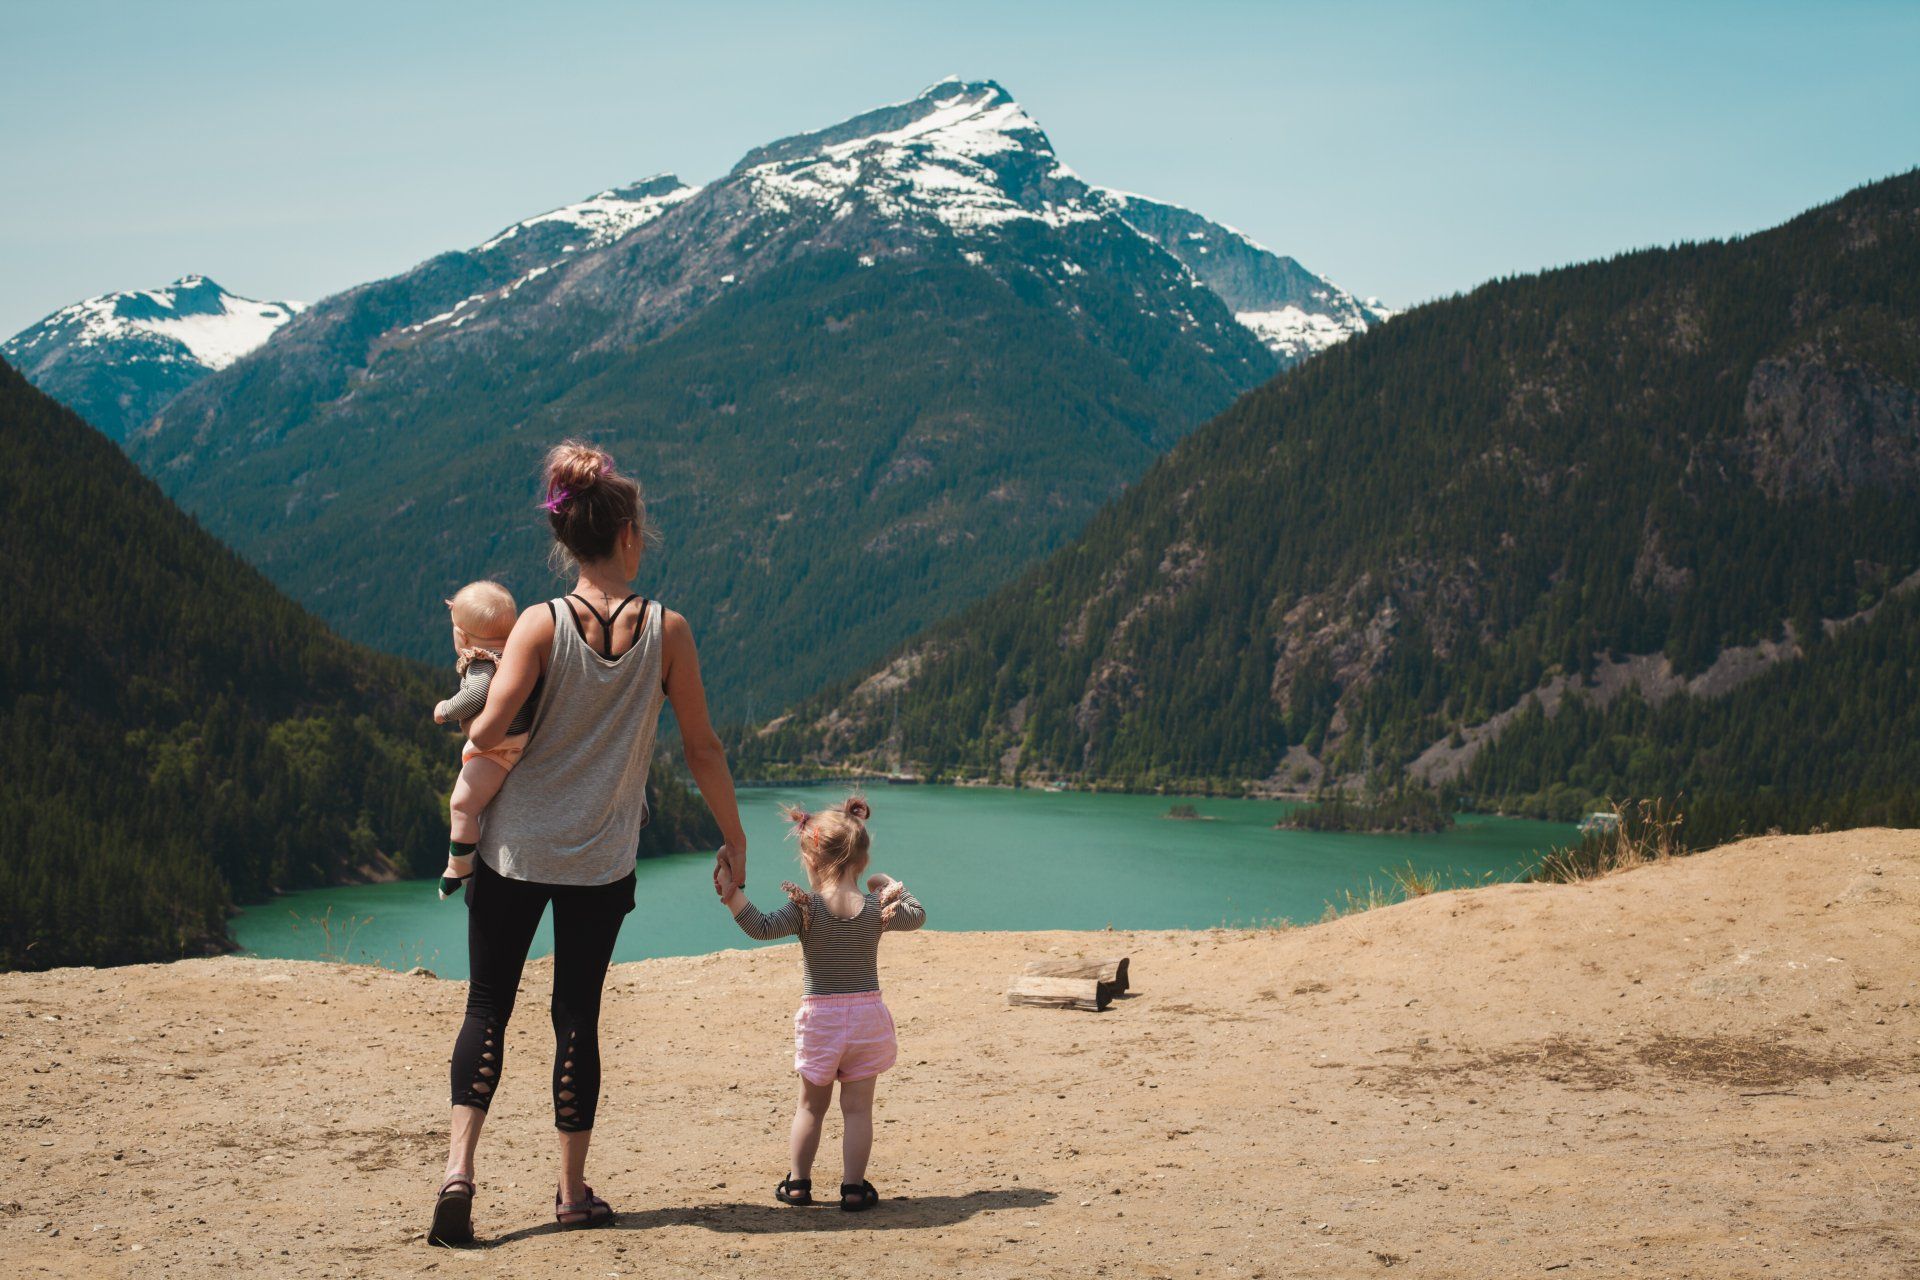 a woman is holding a baby and a little girl while standing on top of a hill overlooking a lake .